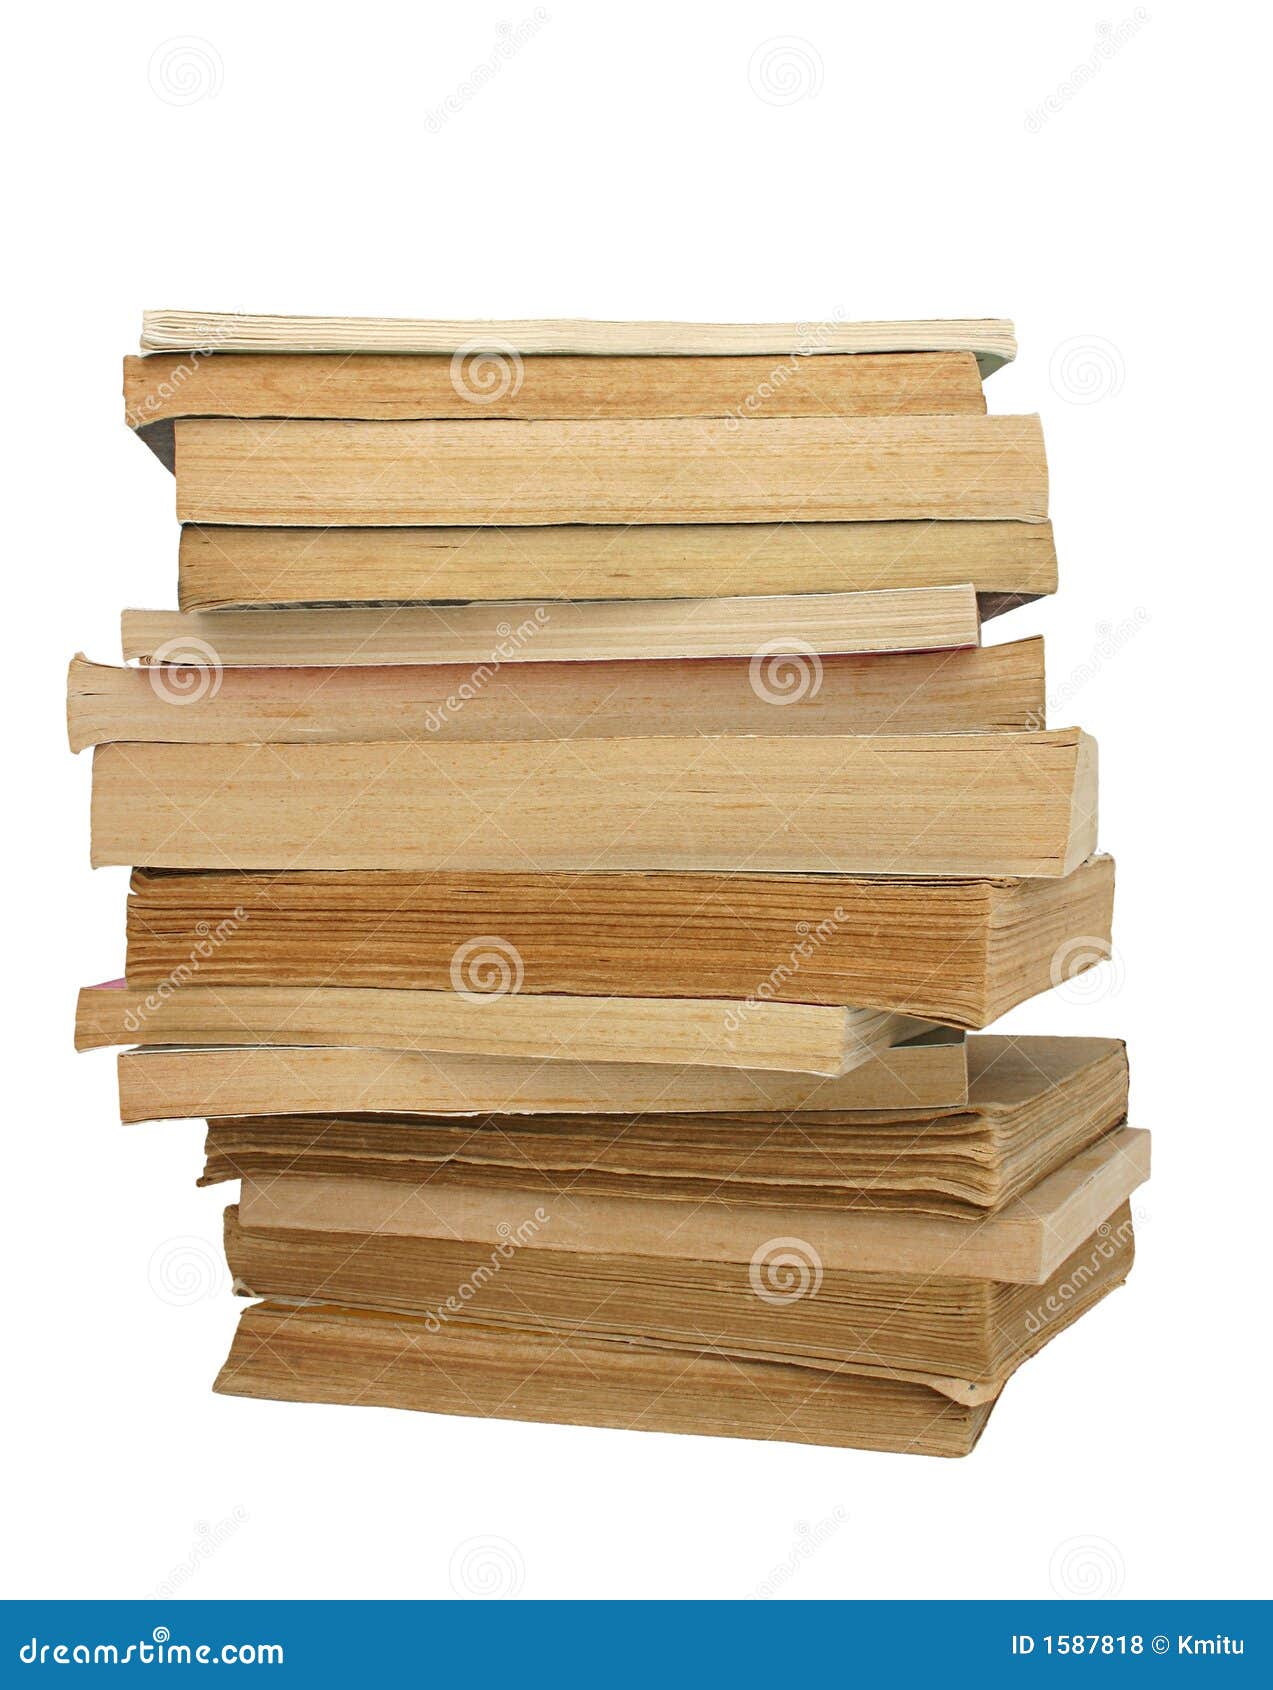 stack of yellowed books #2